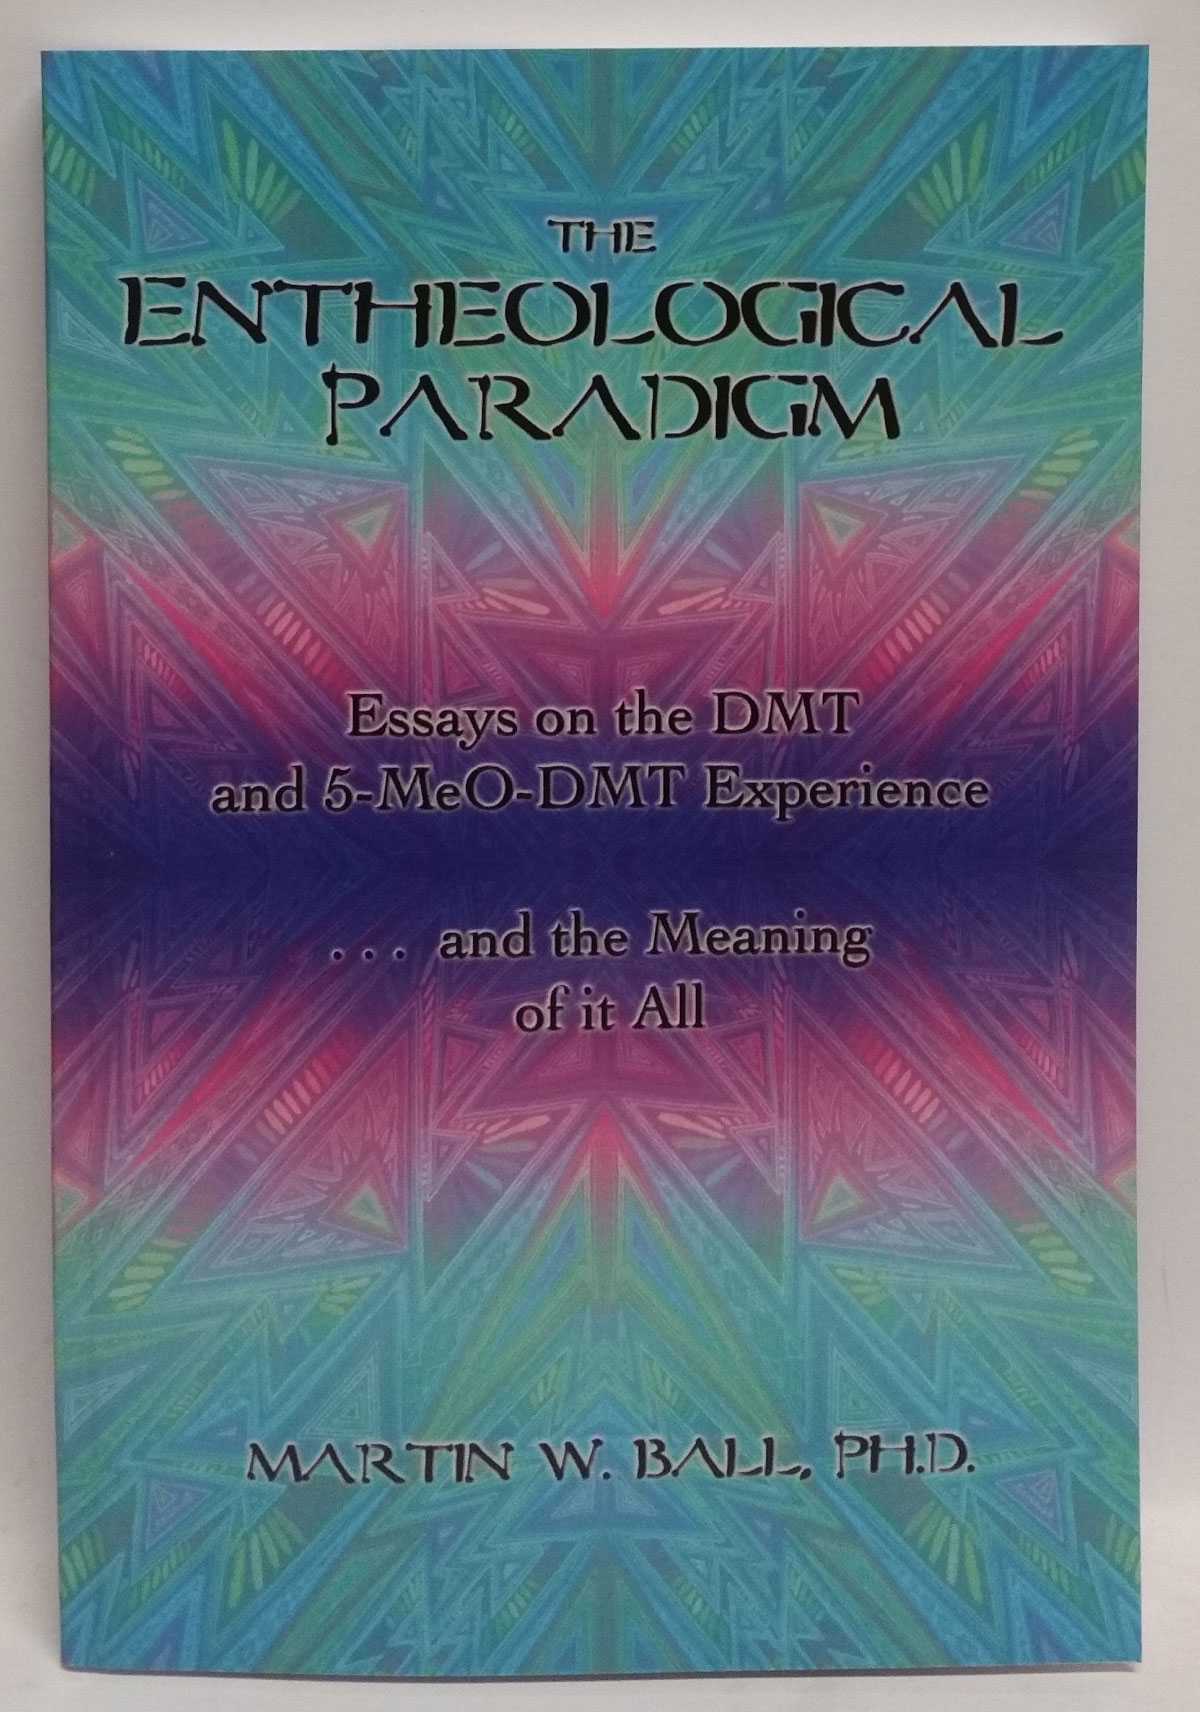 Martin W. Ball - The Entheological Paradigm: Essays on the DMT and 5-MeO-DMT Experience . . . and the Meaning of it All